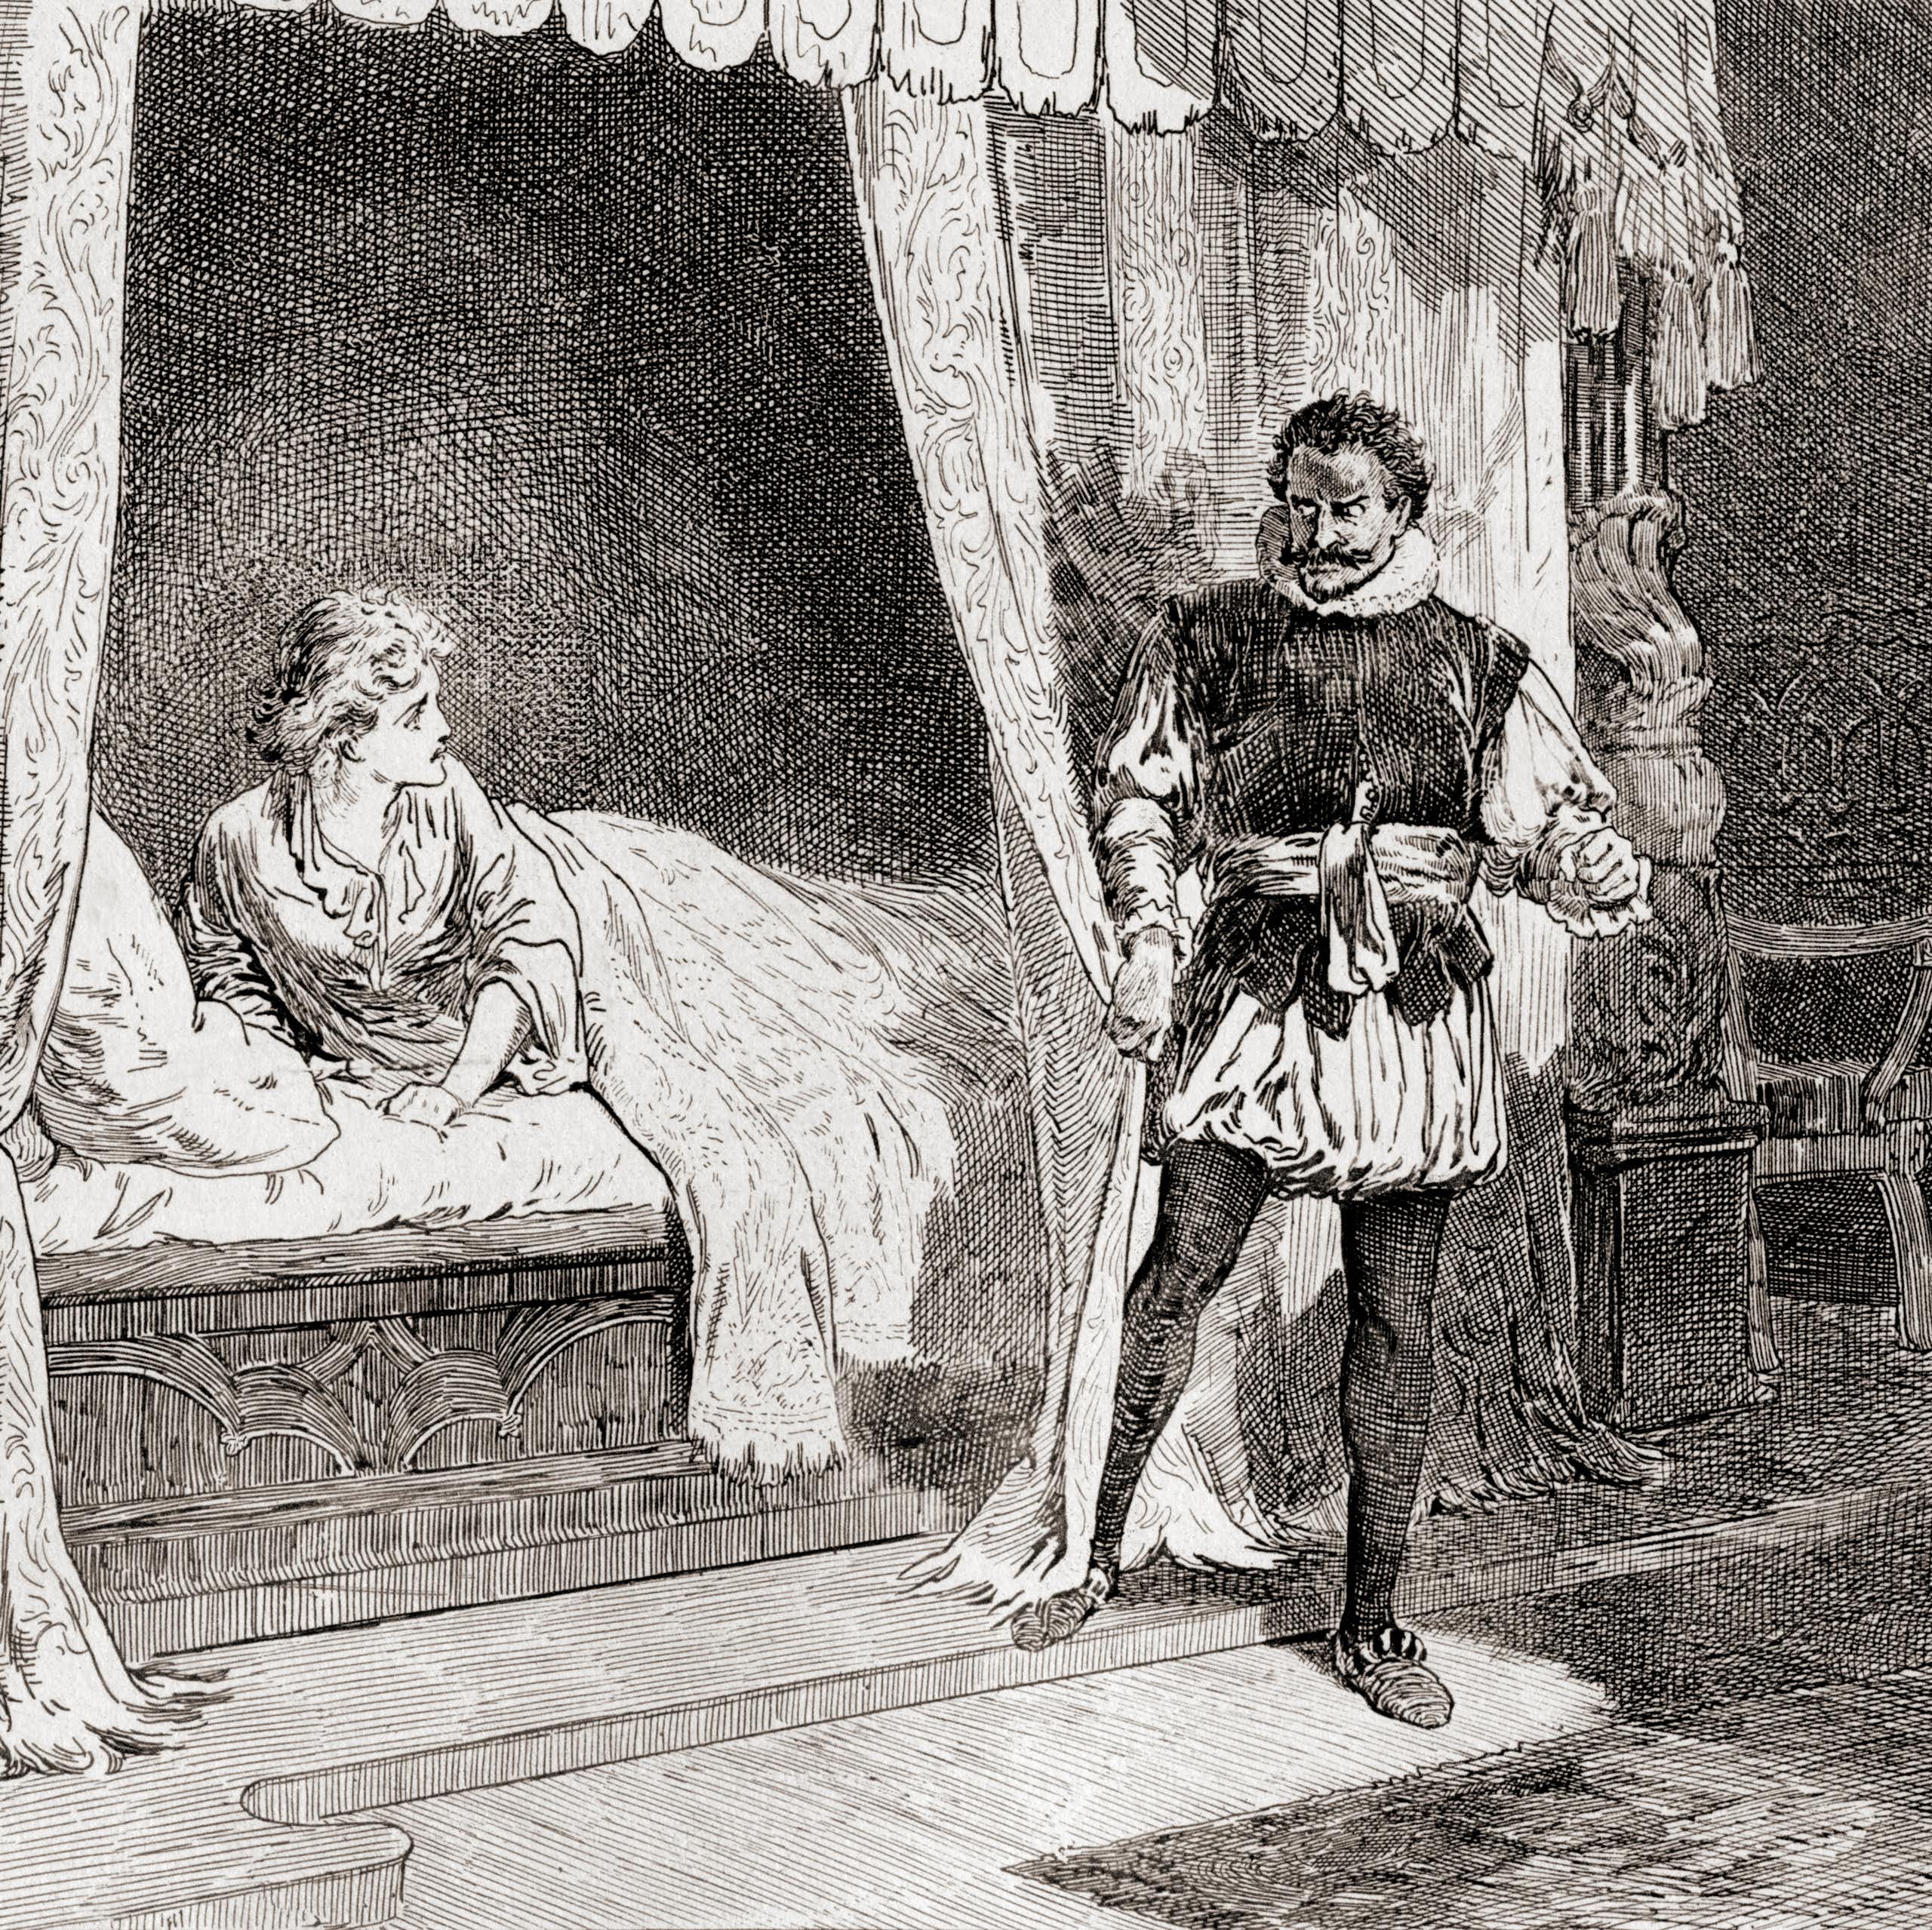 A white woman lies in bed as a Black man stands near her. 